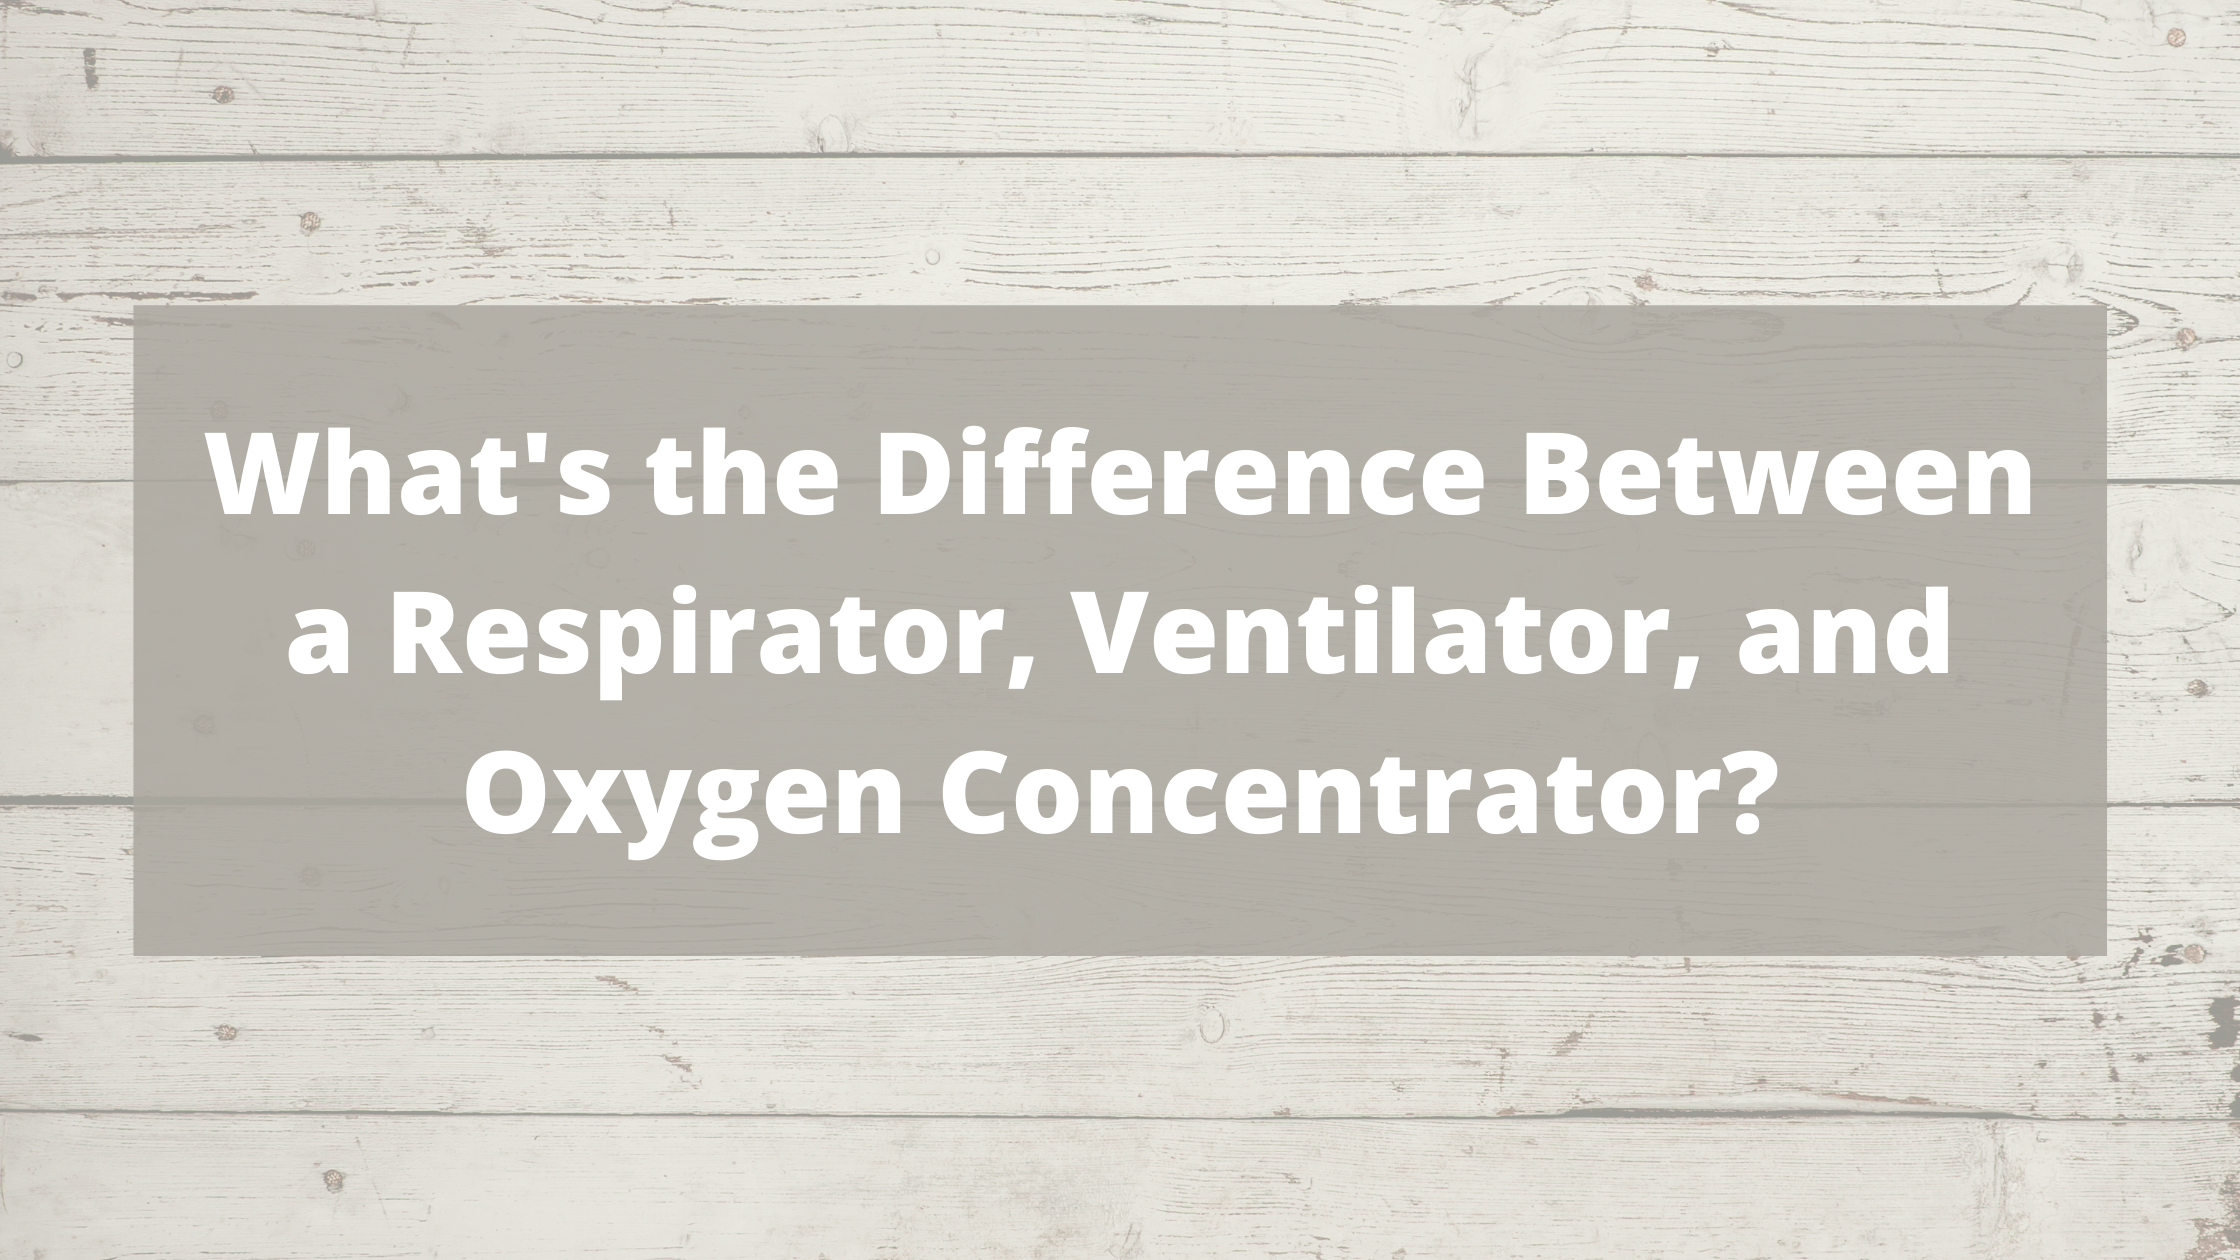 Whats the Difference Between a Respirator, Ventilator, and Oxygen Concentrator?